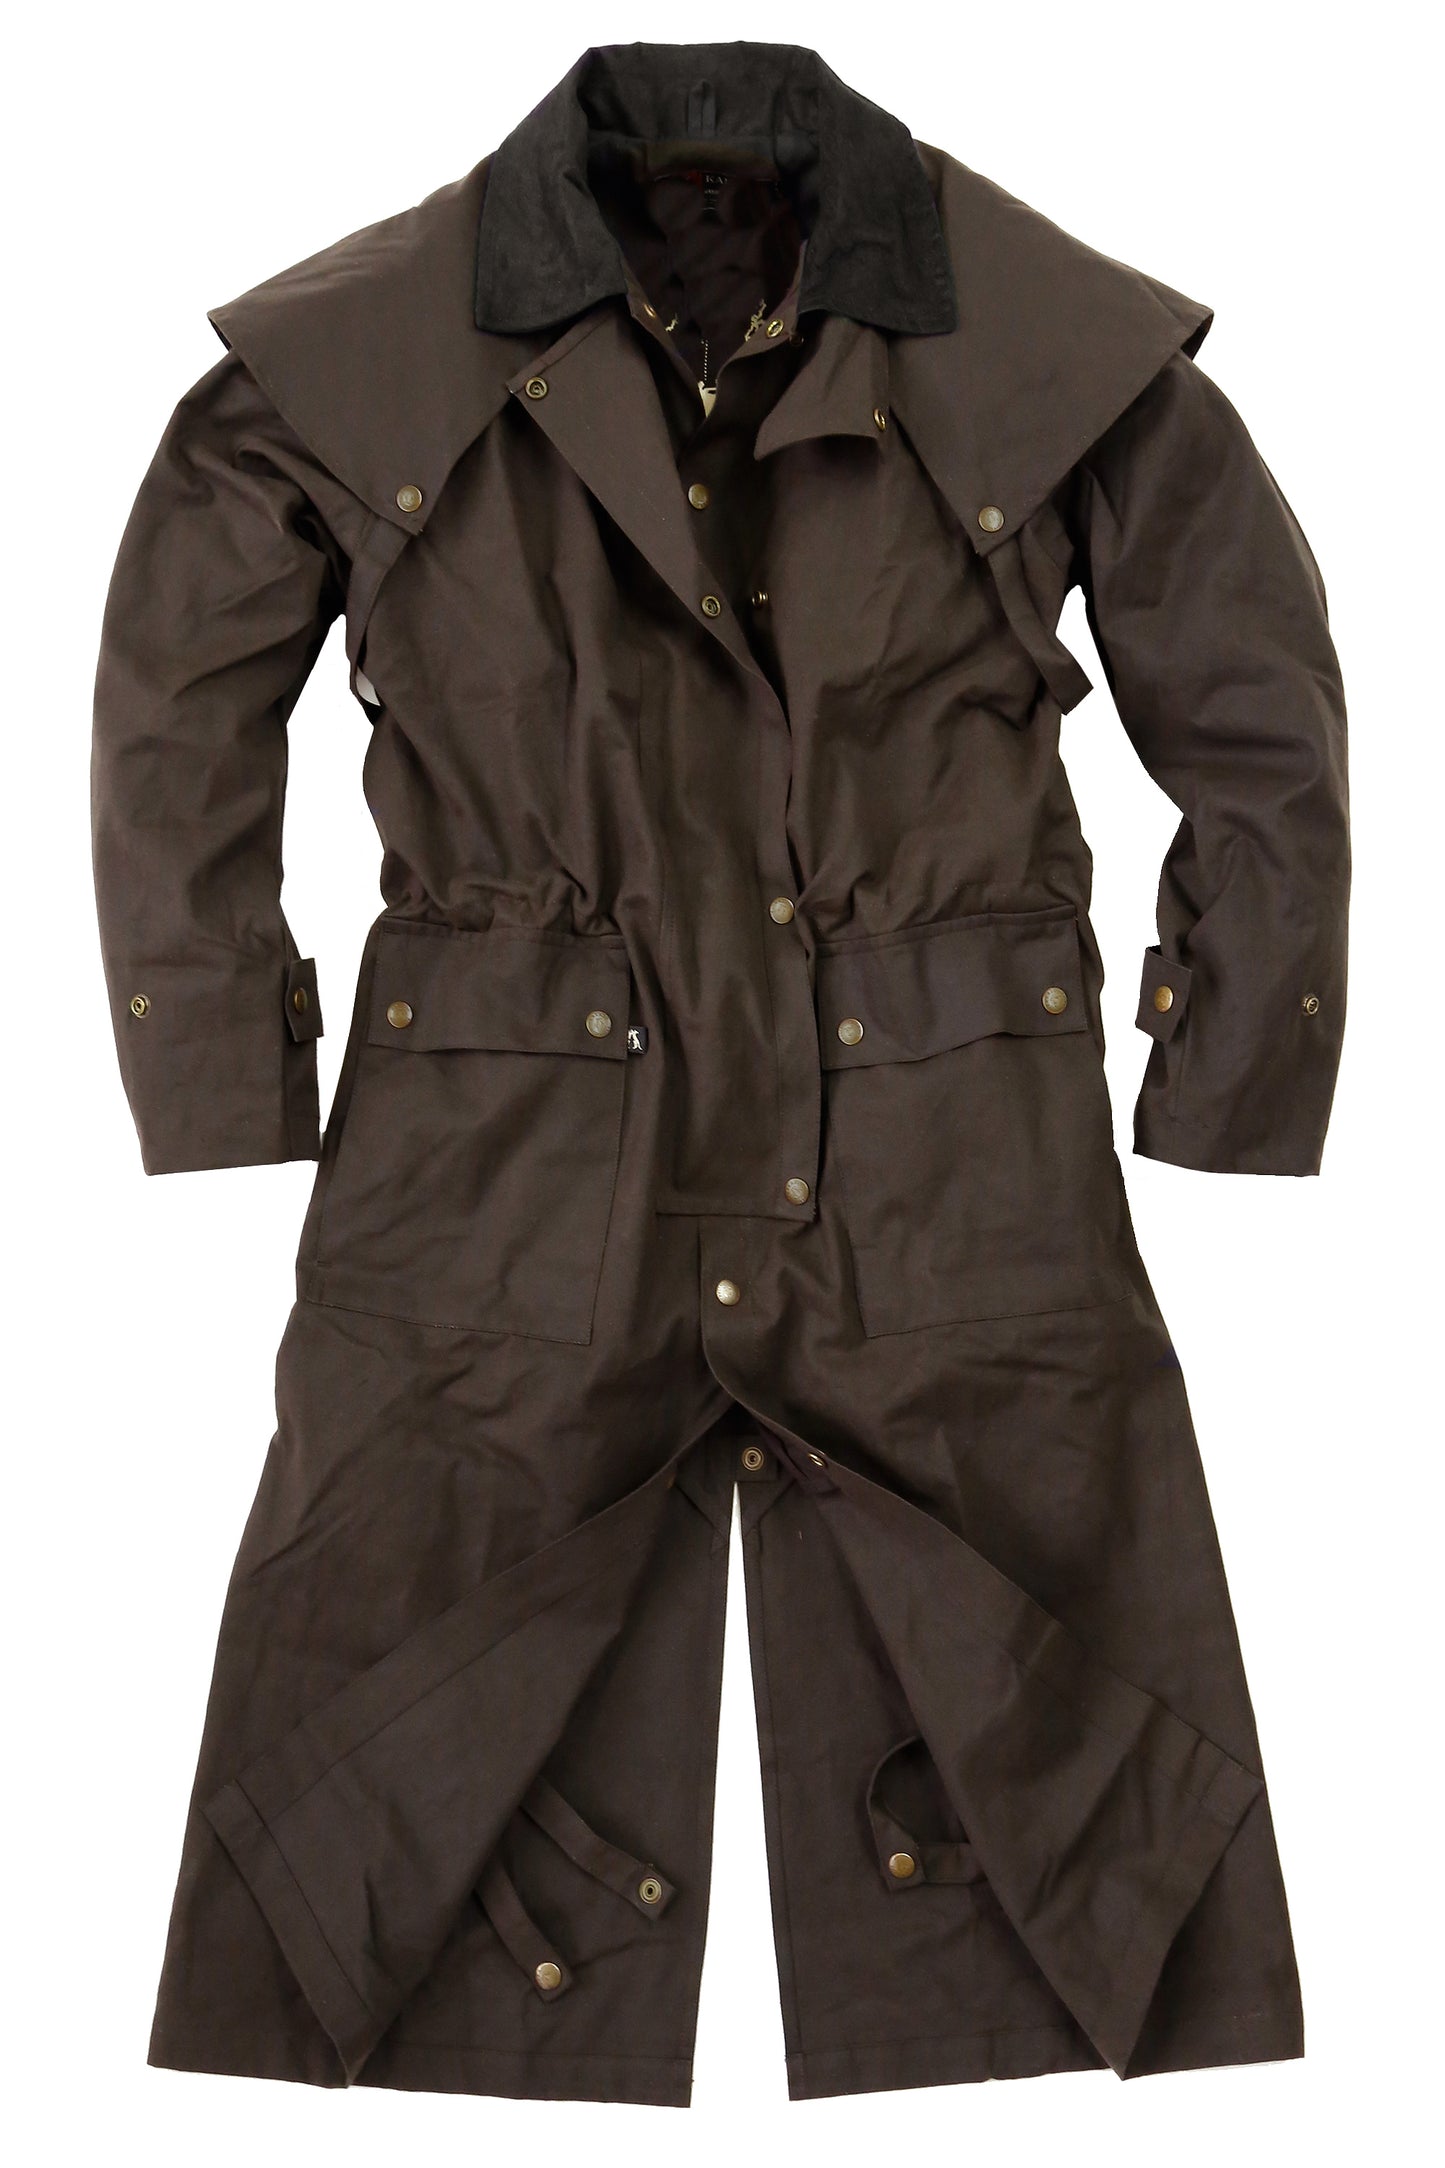 Workhorse Drovers Coat in black with a zipped in Fleecy Liner